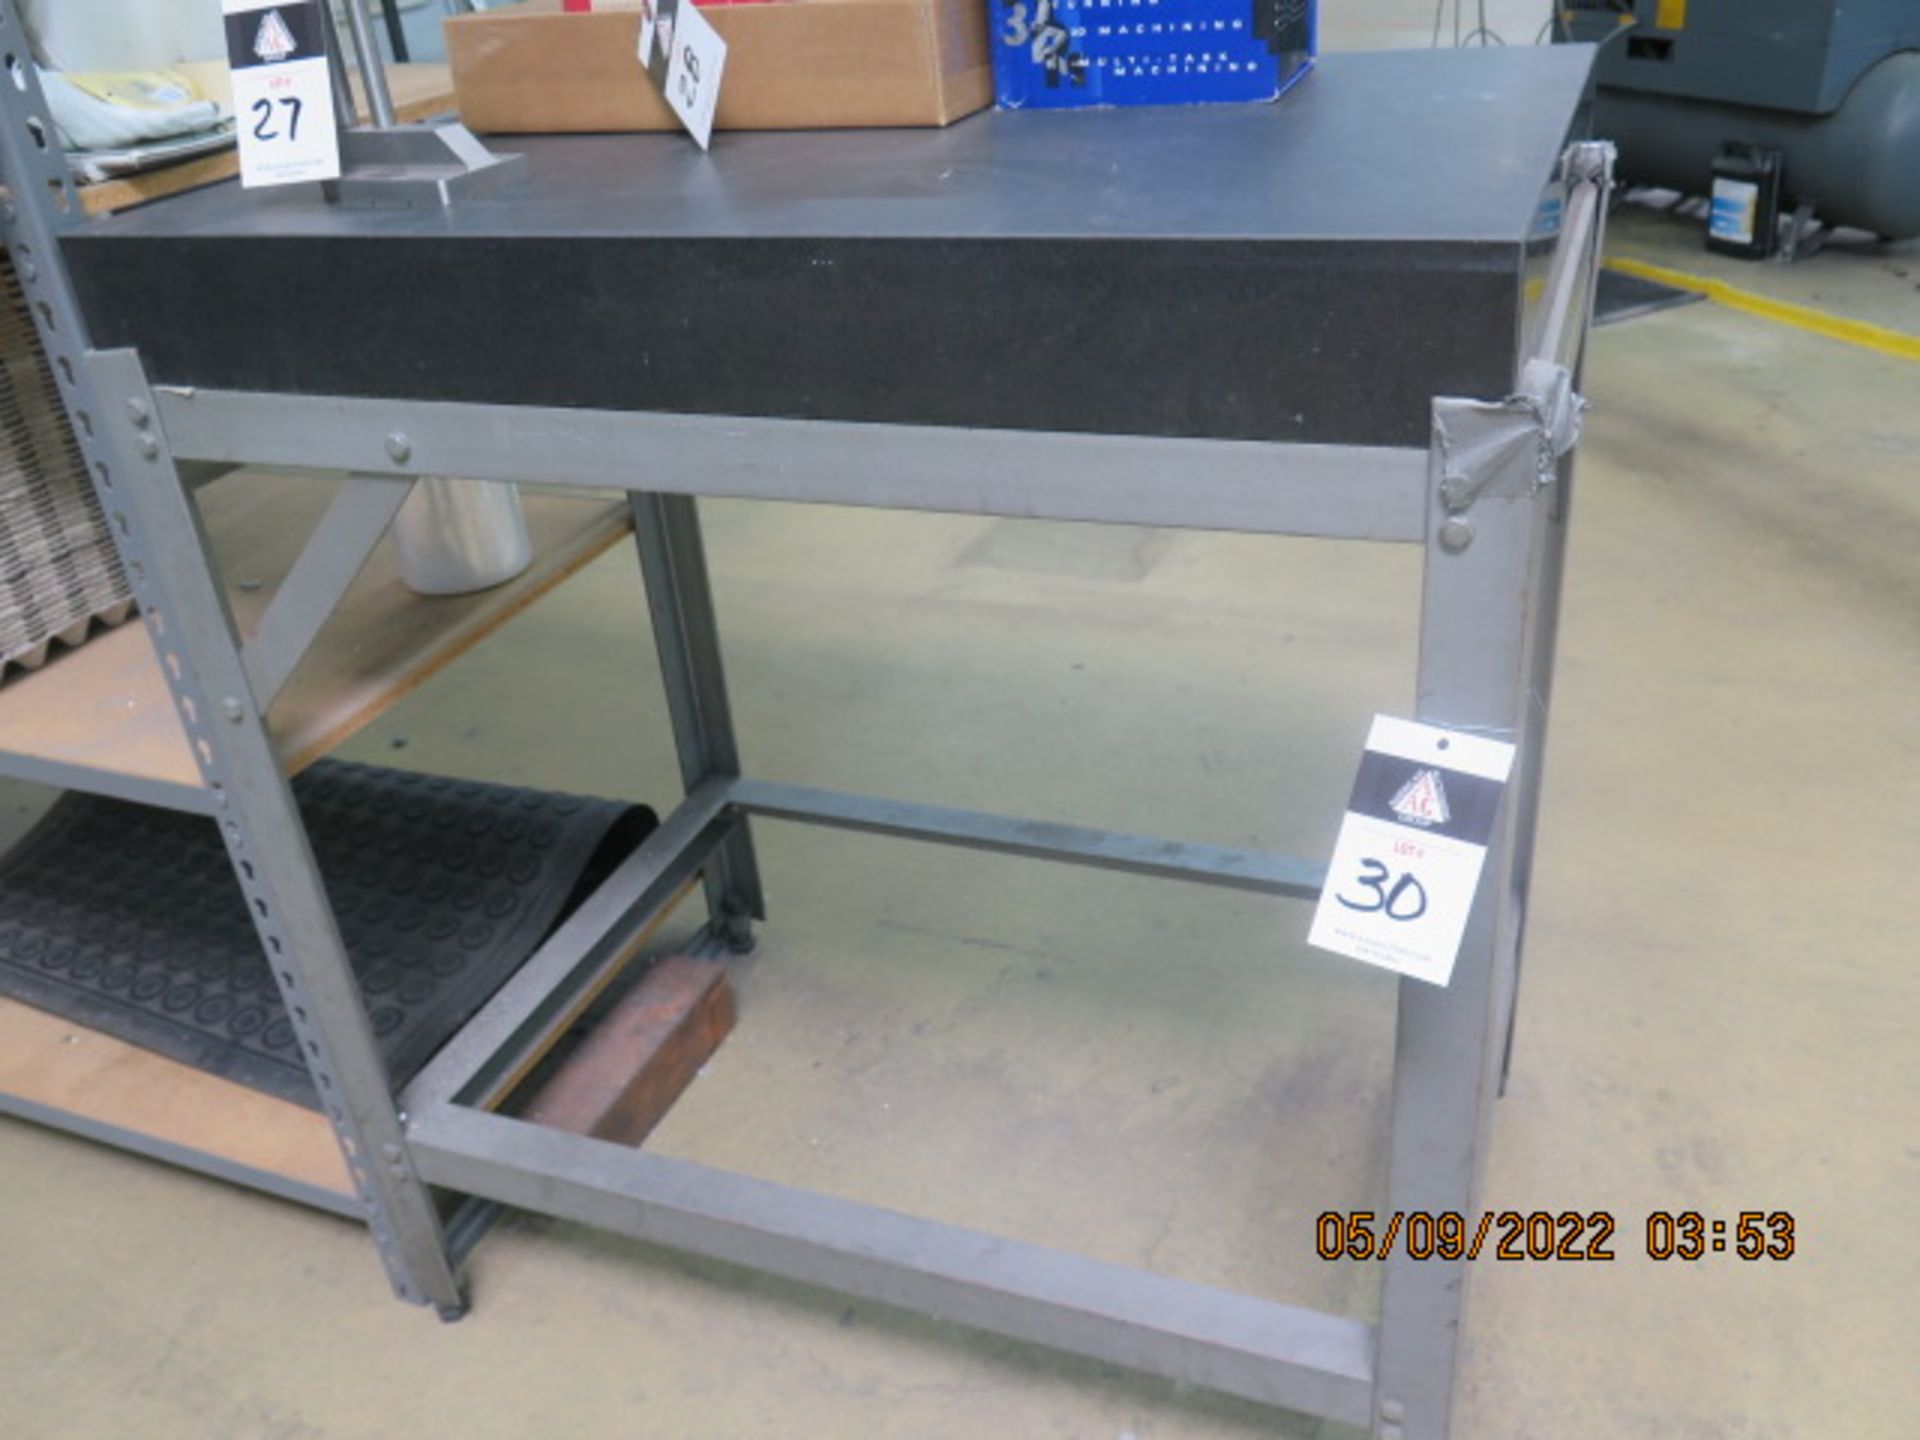 24" x 36" x 4" Granite Surface Plate w/ Stand (SOLD AS-IS - NO WARRANTY)